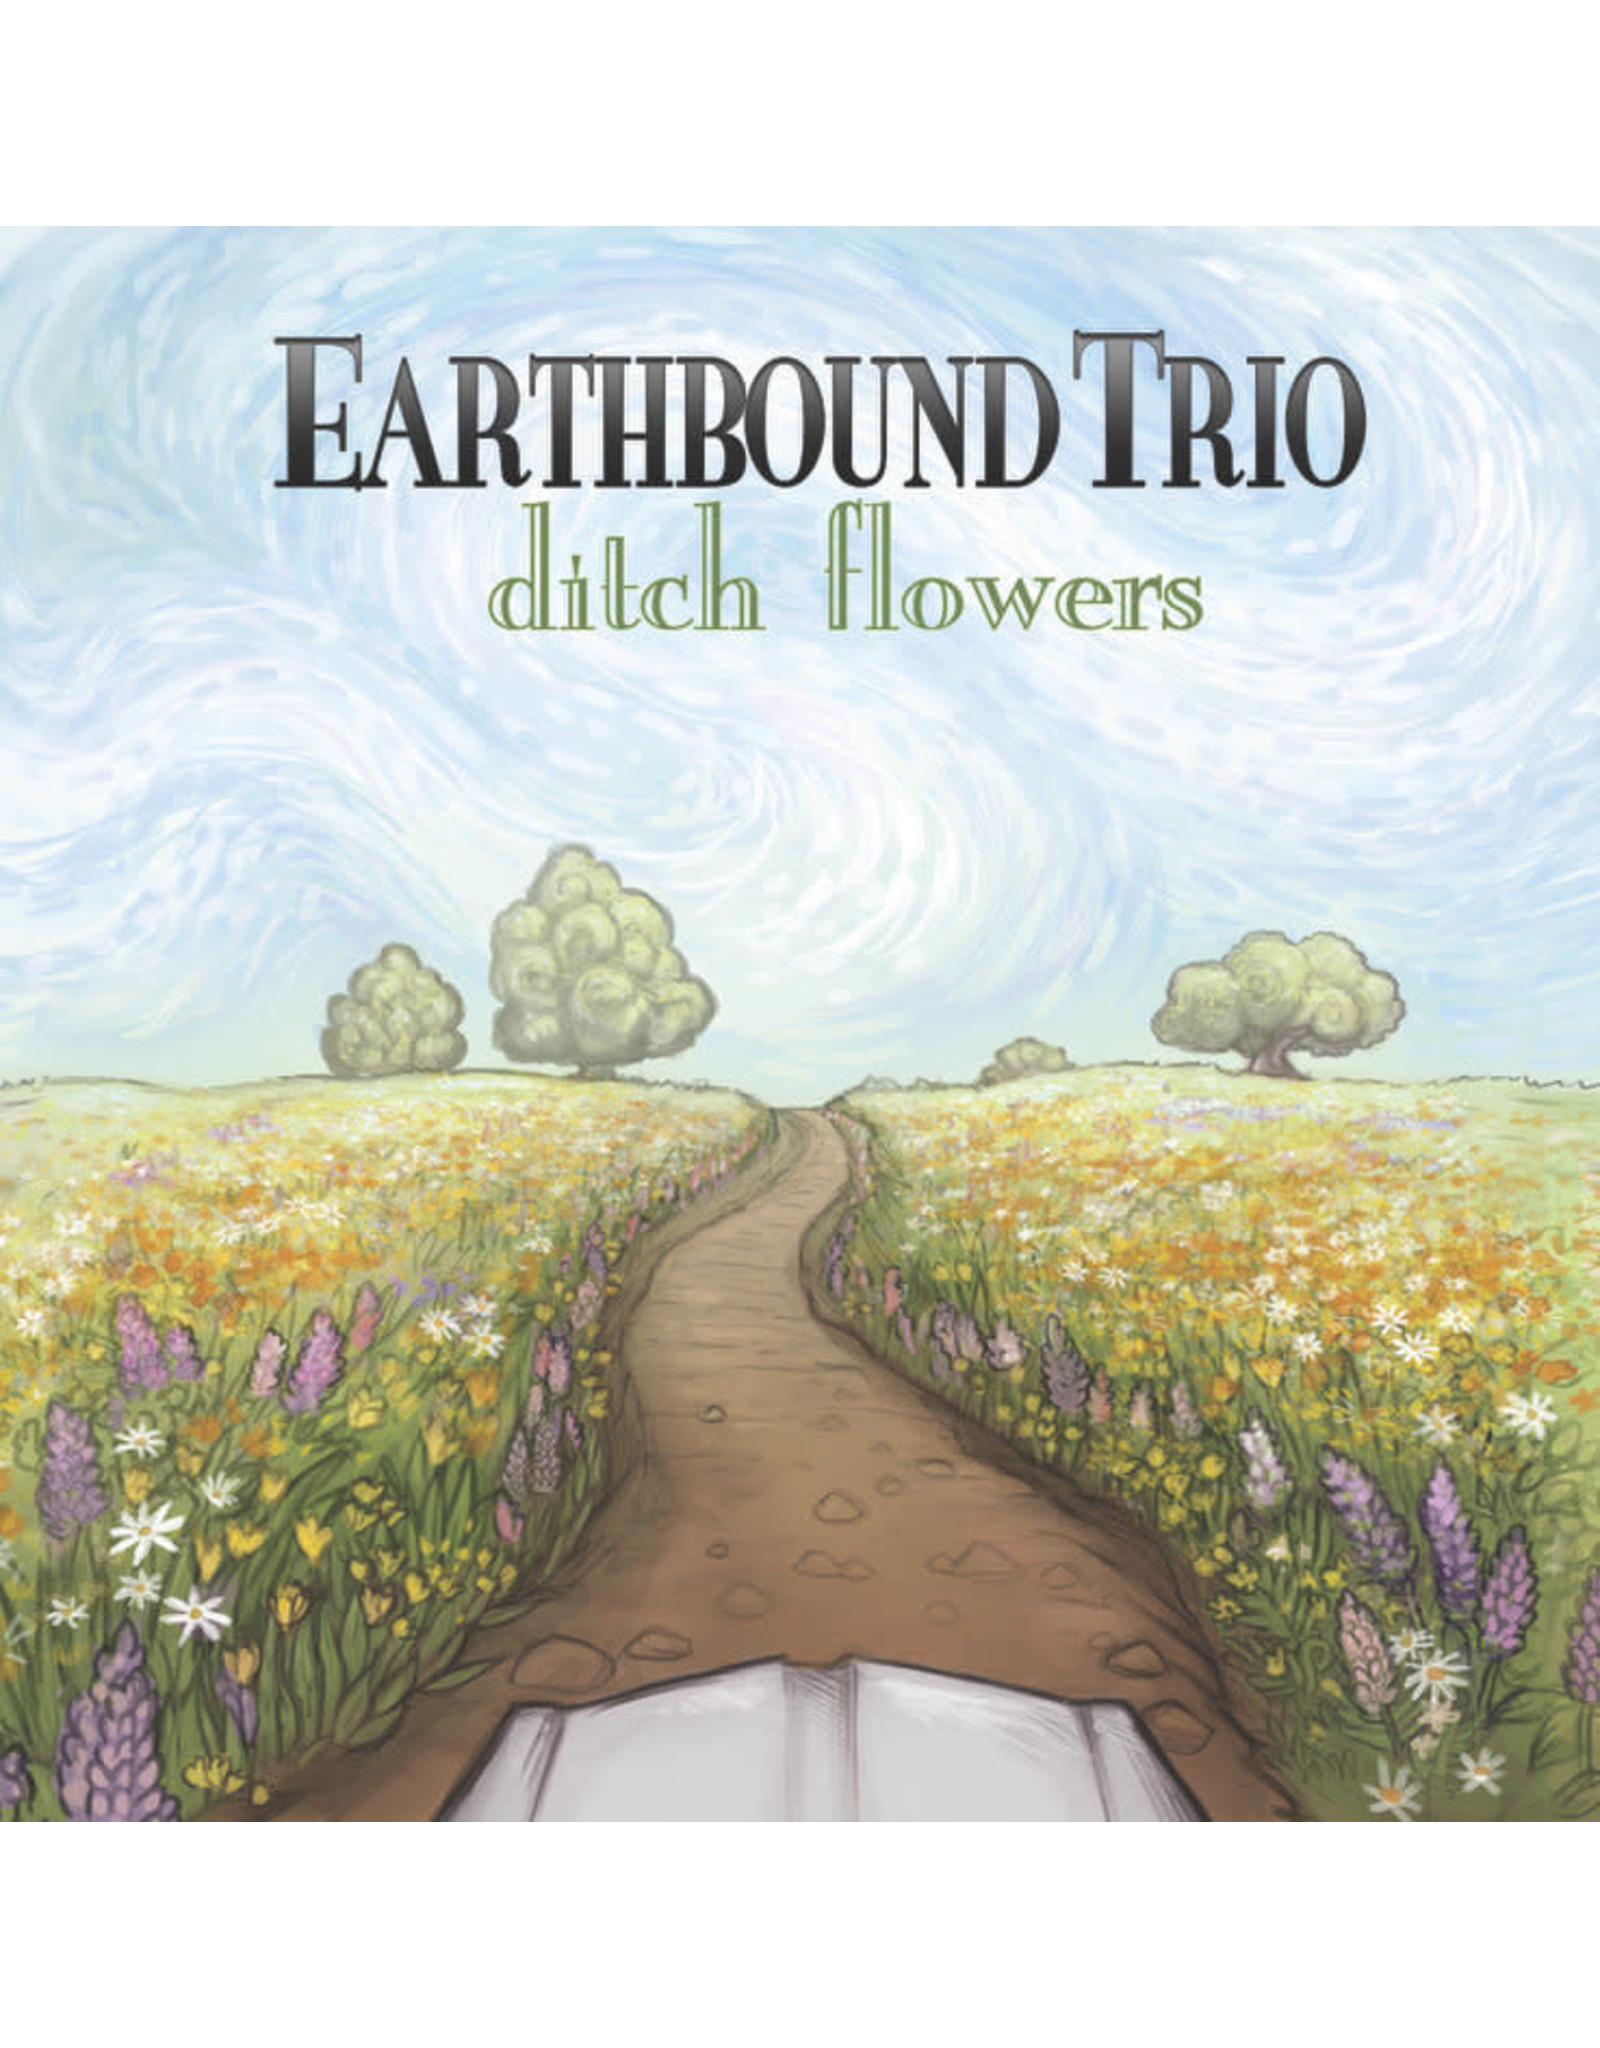 Earthbound Trio - Ditch Flowers CD